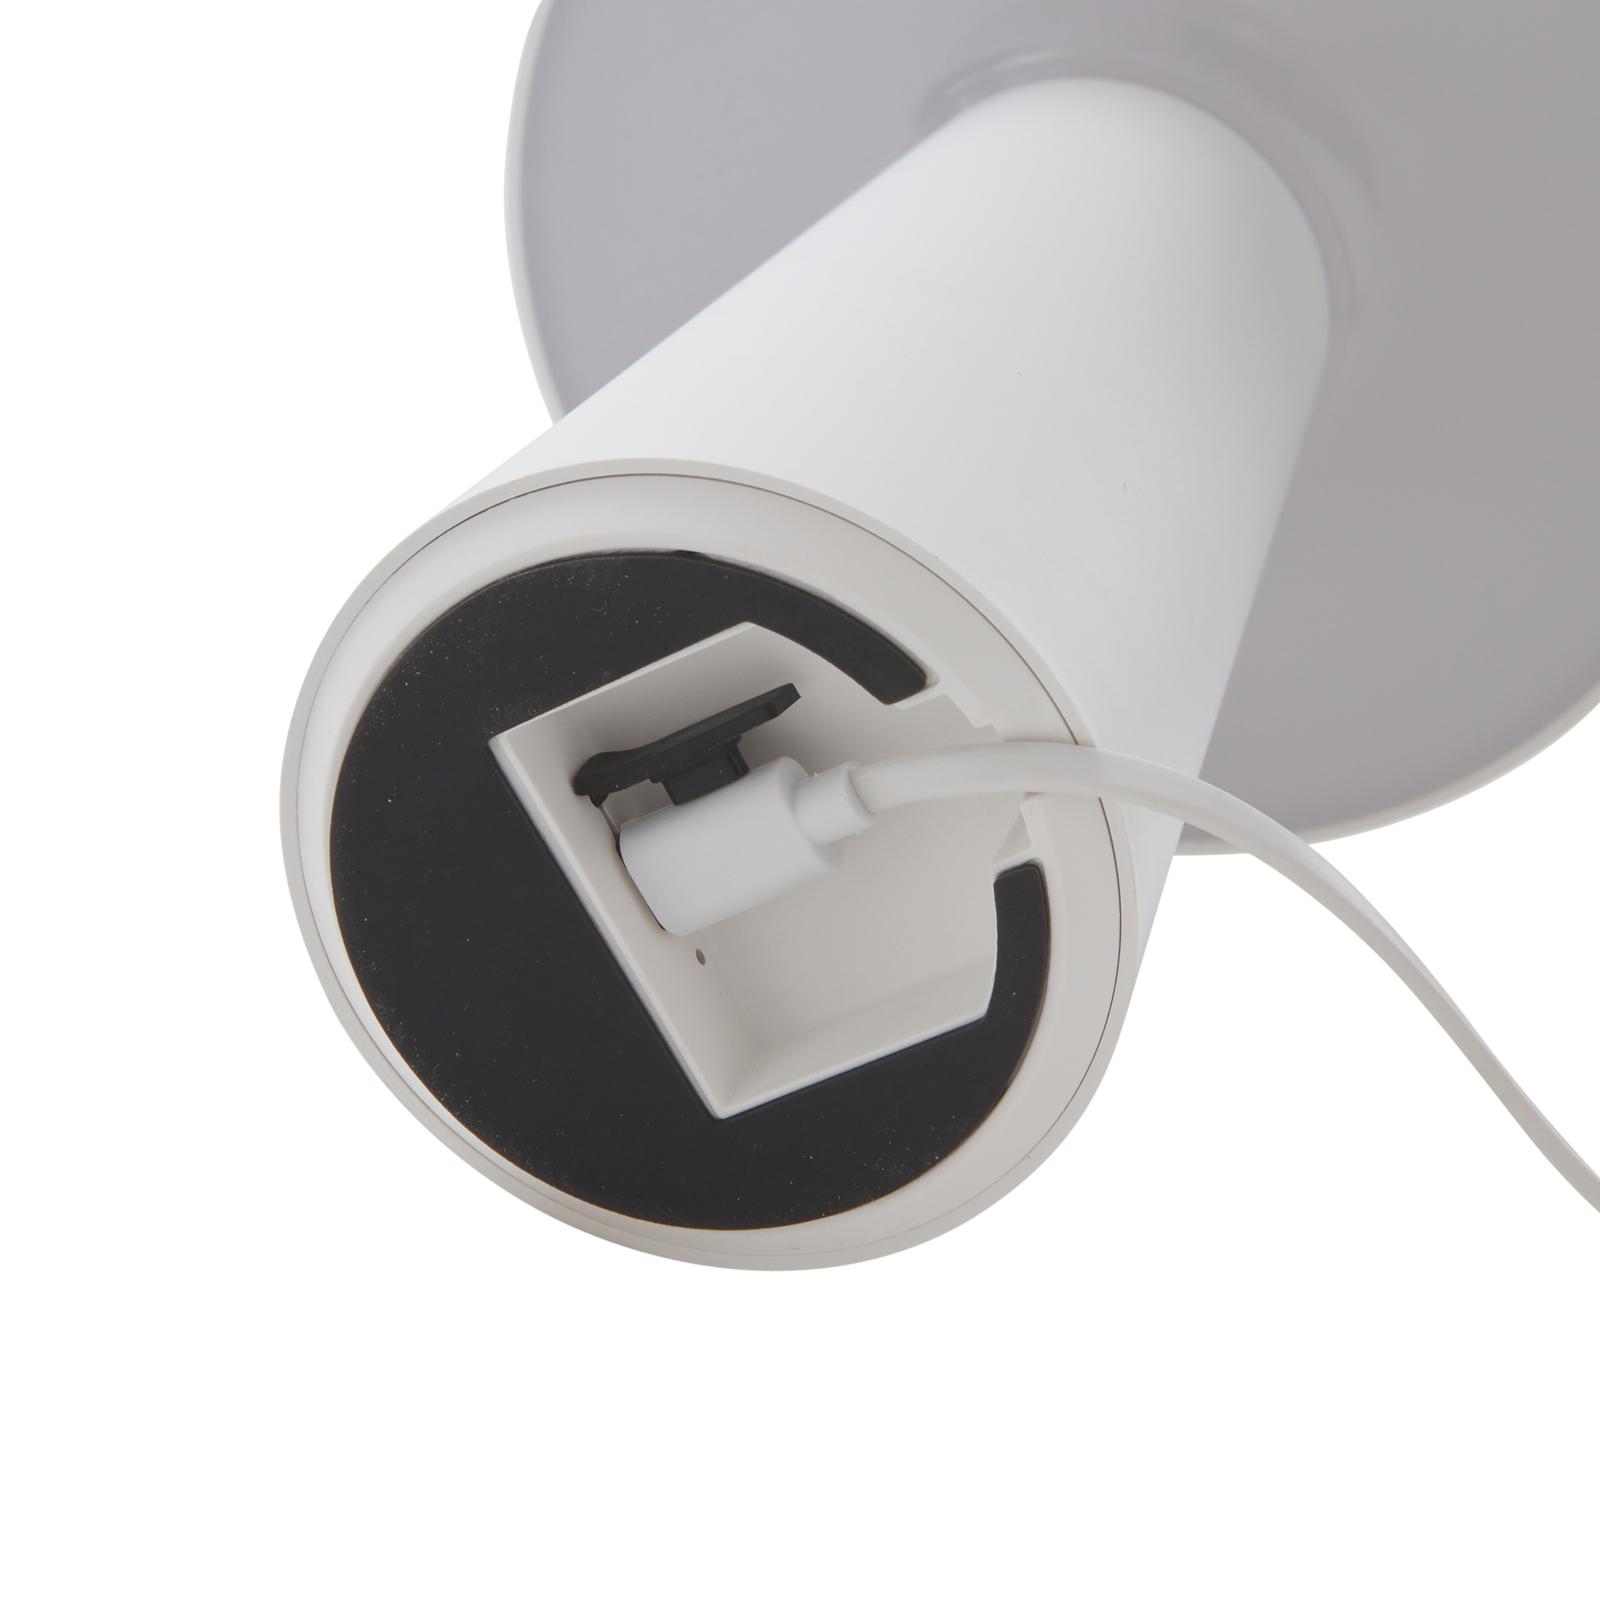 Lindby Zyre LED oplaadbare tafellamp, wit, IP44, touchdimmer